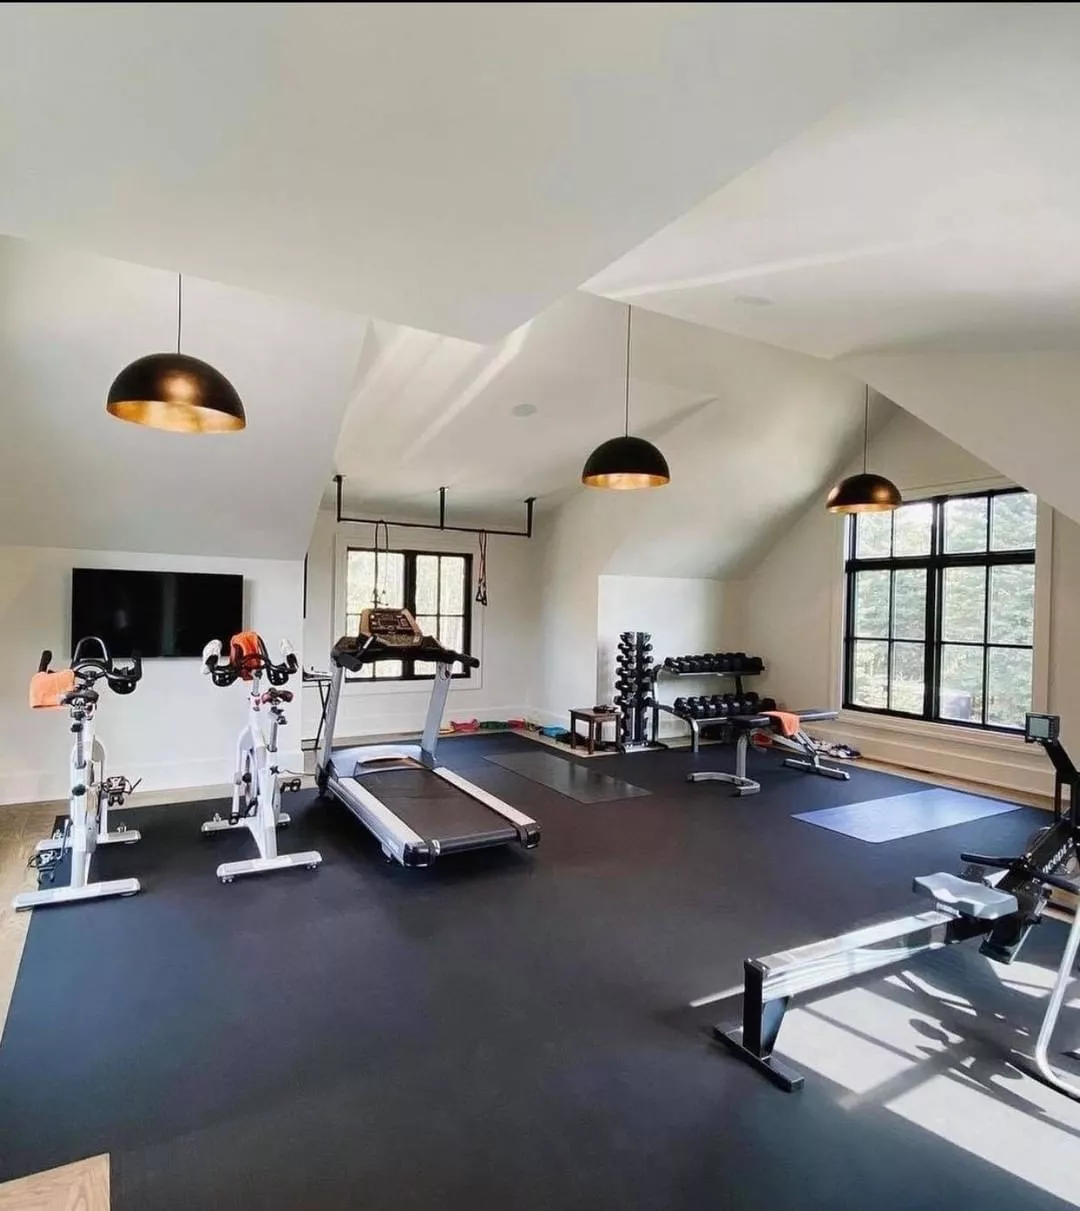 How to Design a Home Gym That You'll Actually Use - The New York Times